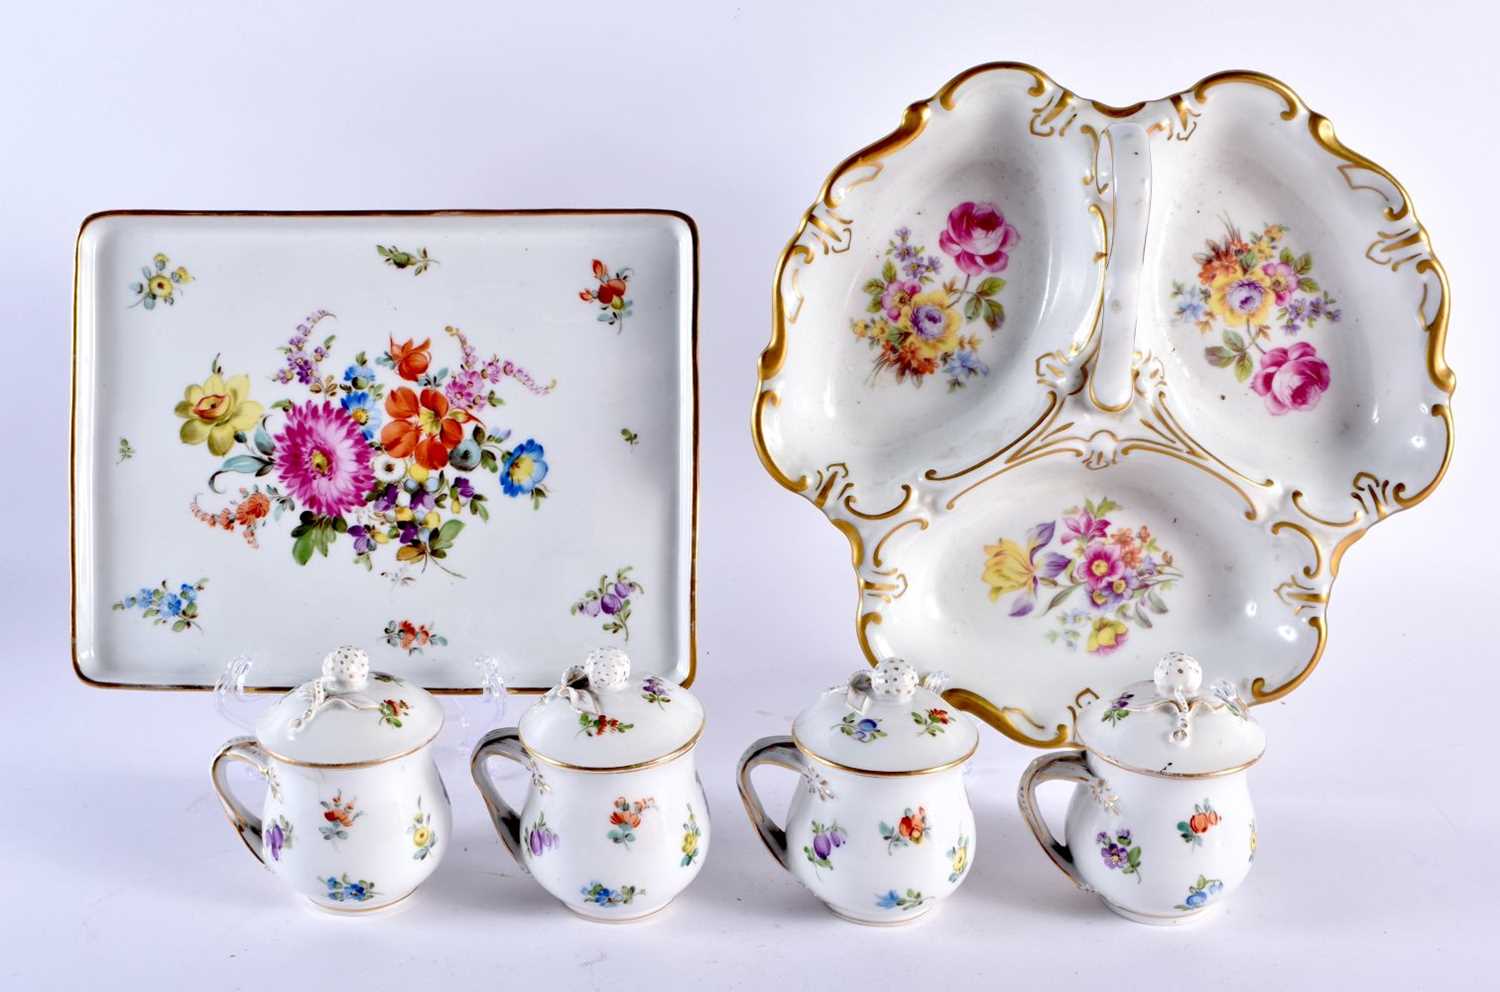 Pre-1891 Set of four French custard cups and covers with original tray painted with flowers,